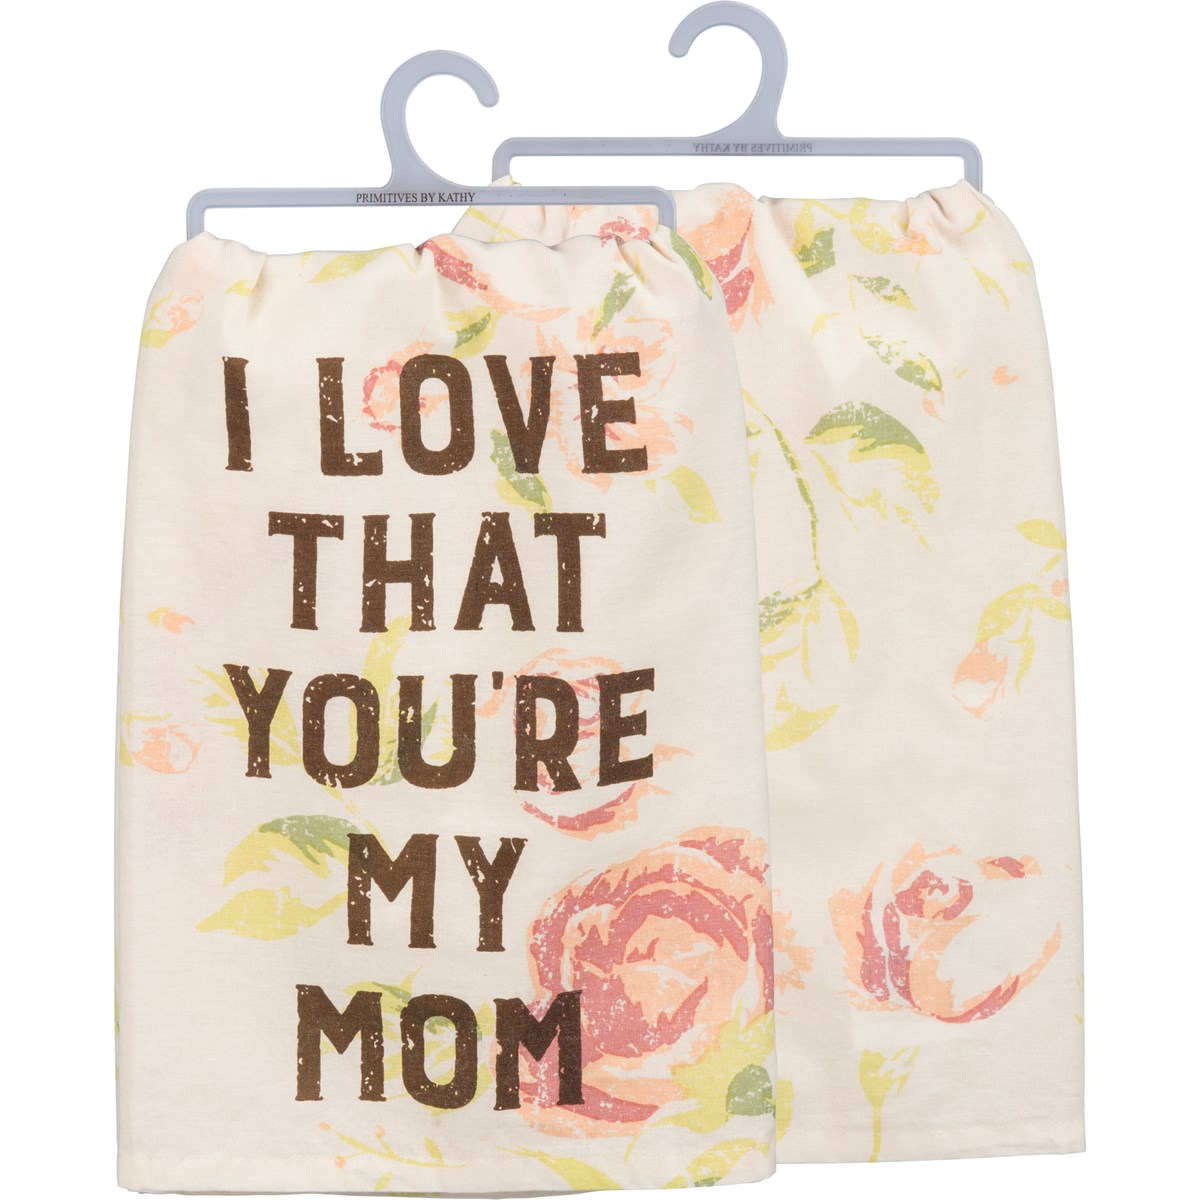 Kitchen Towel - I Love That You're My Mom - 28" x 28" - Cotton